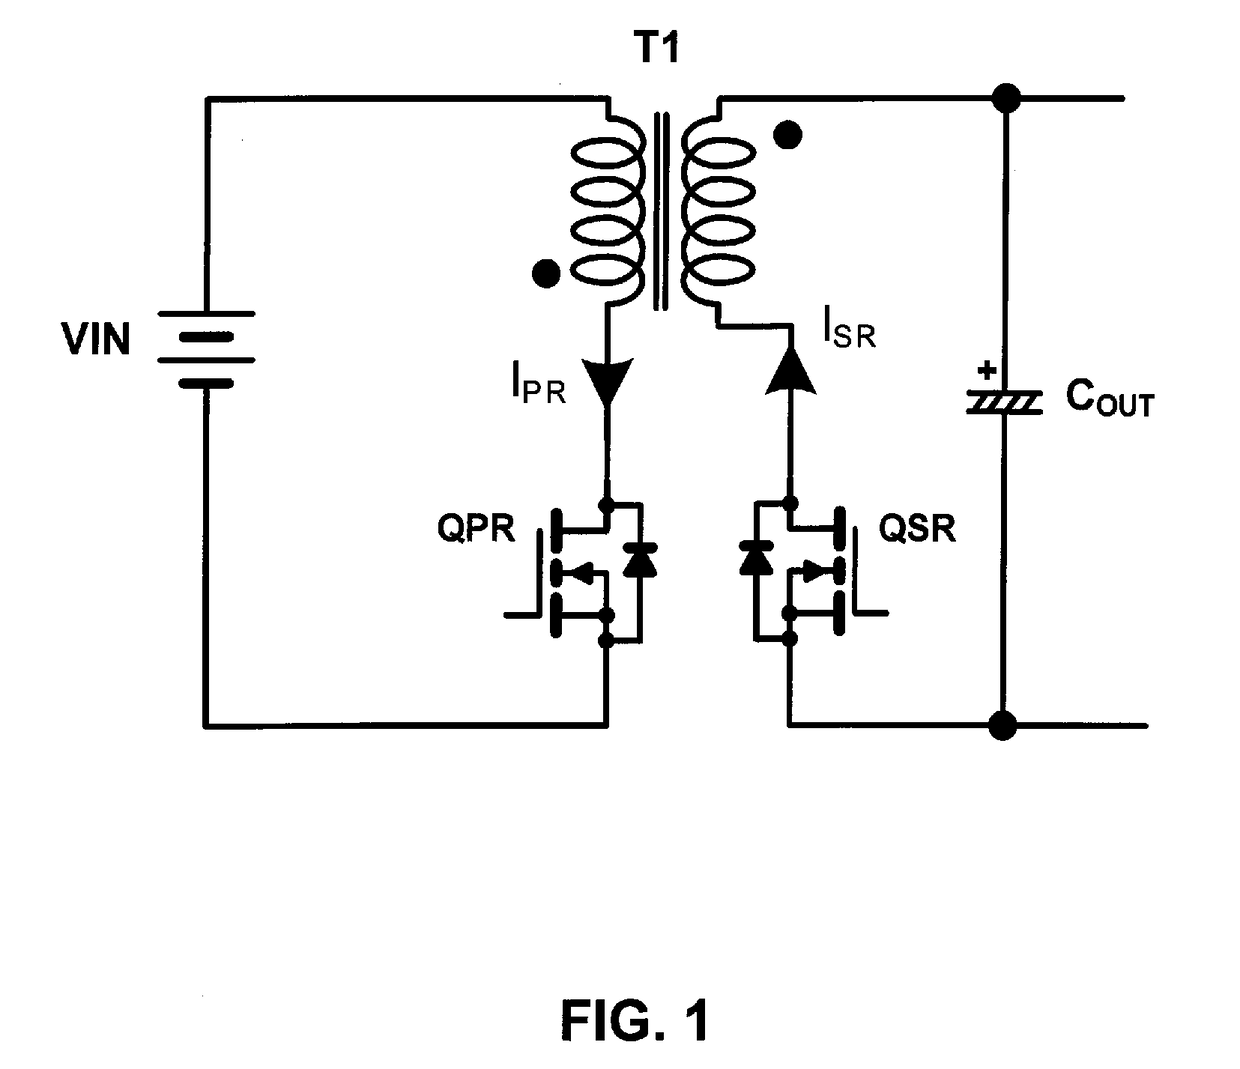 Gate pre-positioning for fast turn-off of synchronous rectifier